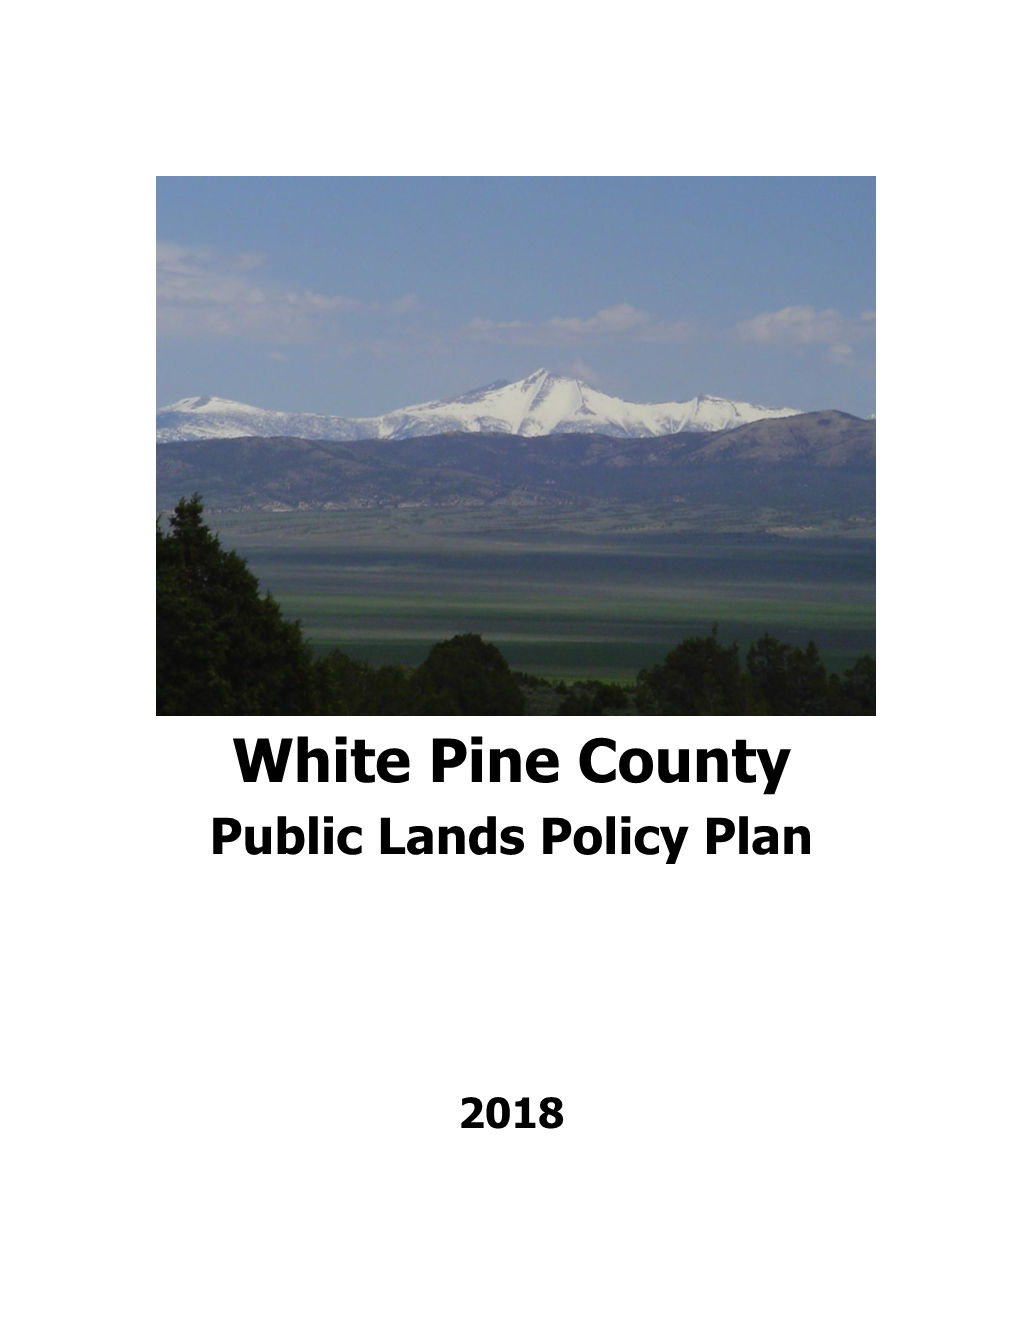 Public Lands Policy Plan 2018